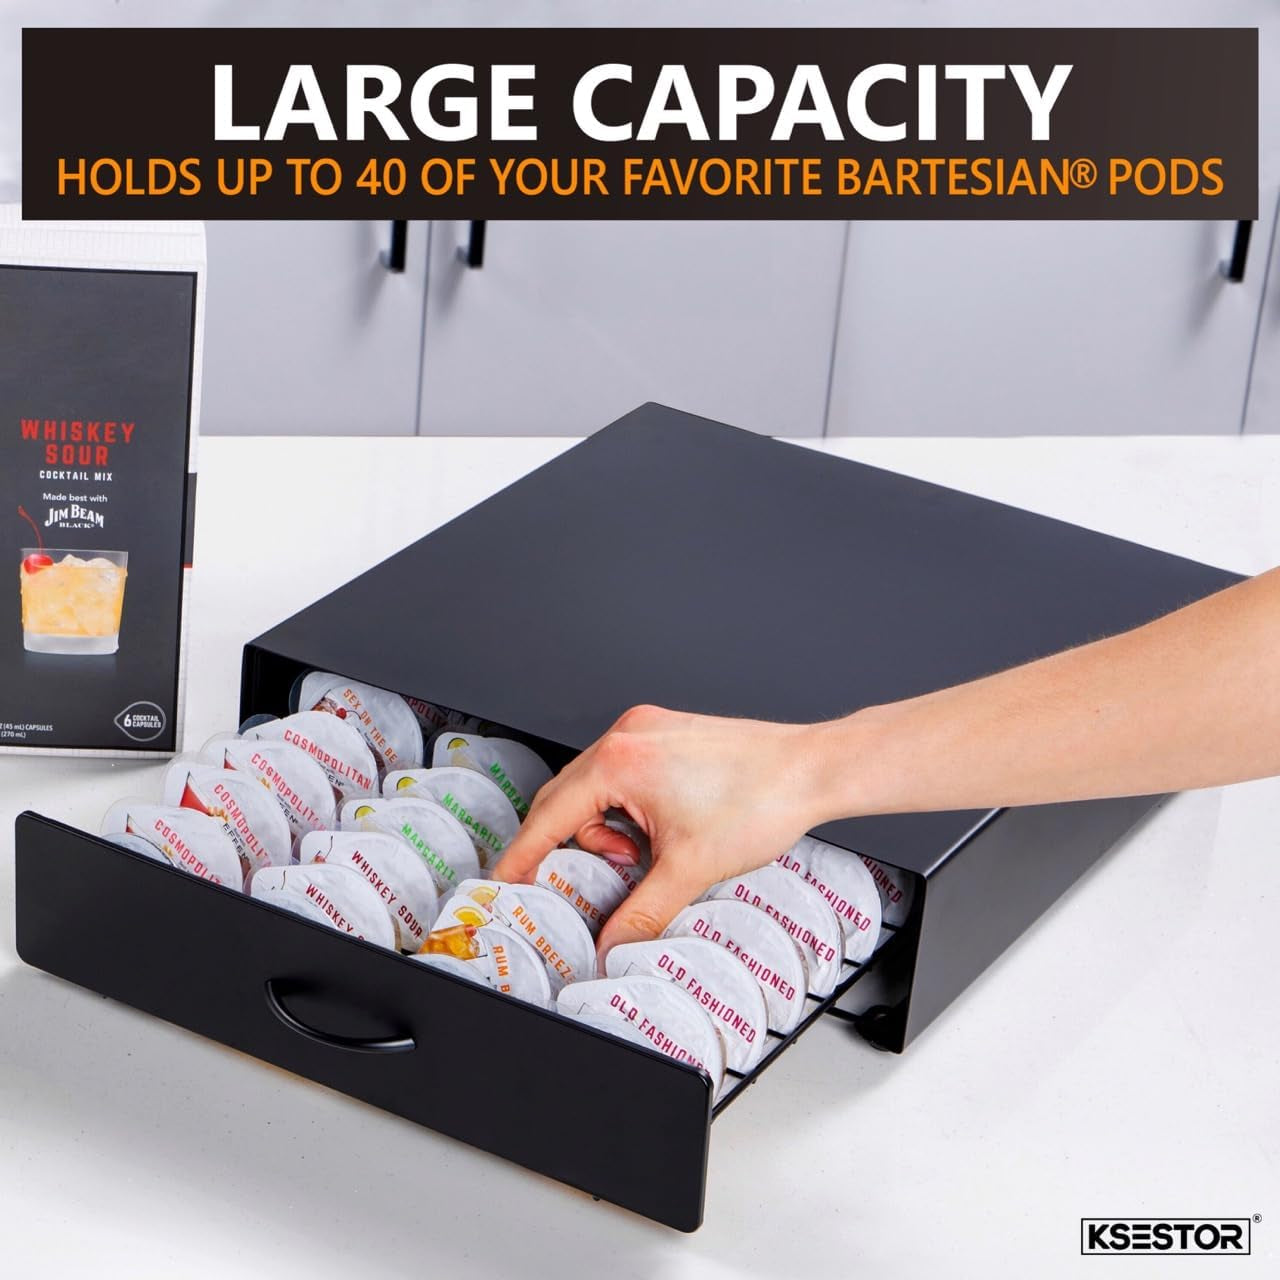 Premium Storage Drawer for Bartesian Capsules by  - Holds up to 40 Bartesian Pods - Sturdy and Stackable Bartesian Pod Holder - Bartesian - Bartesian Machine